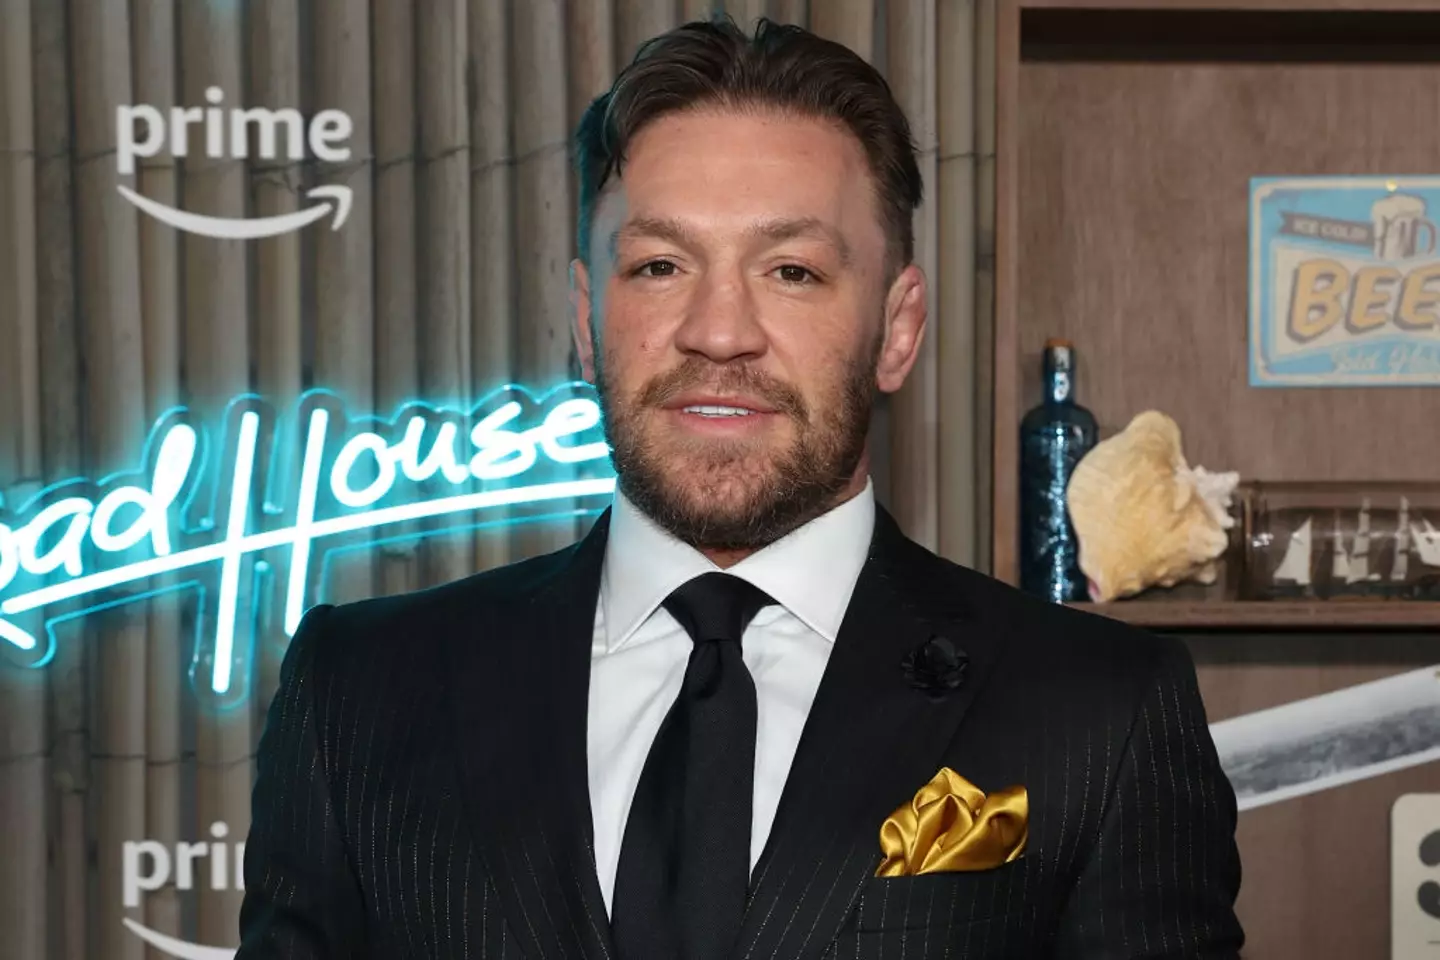 McGregor is keen to continue his acting career (Image: Getty)